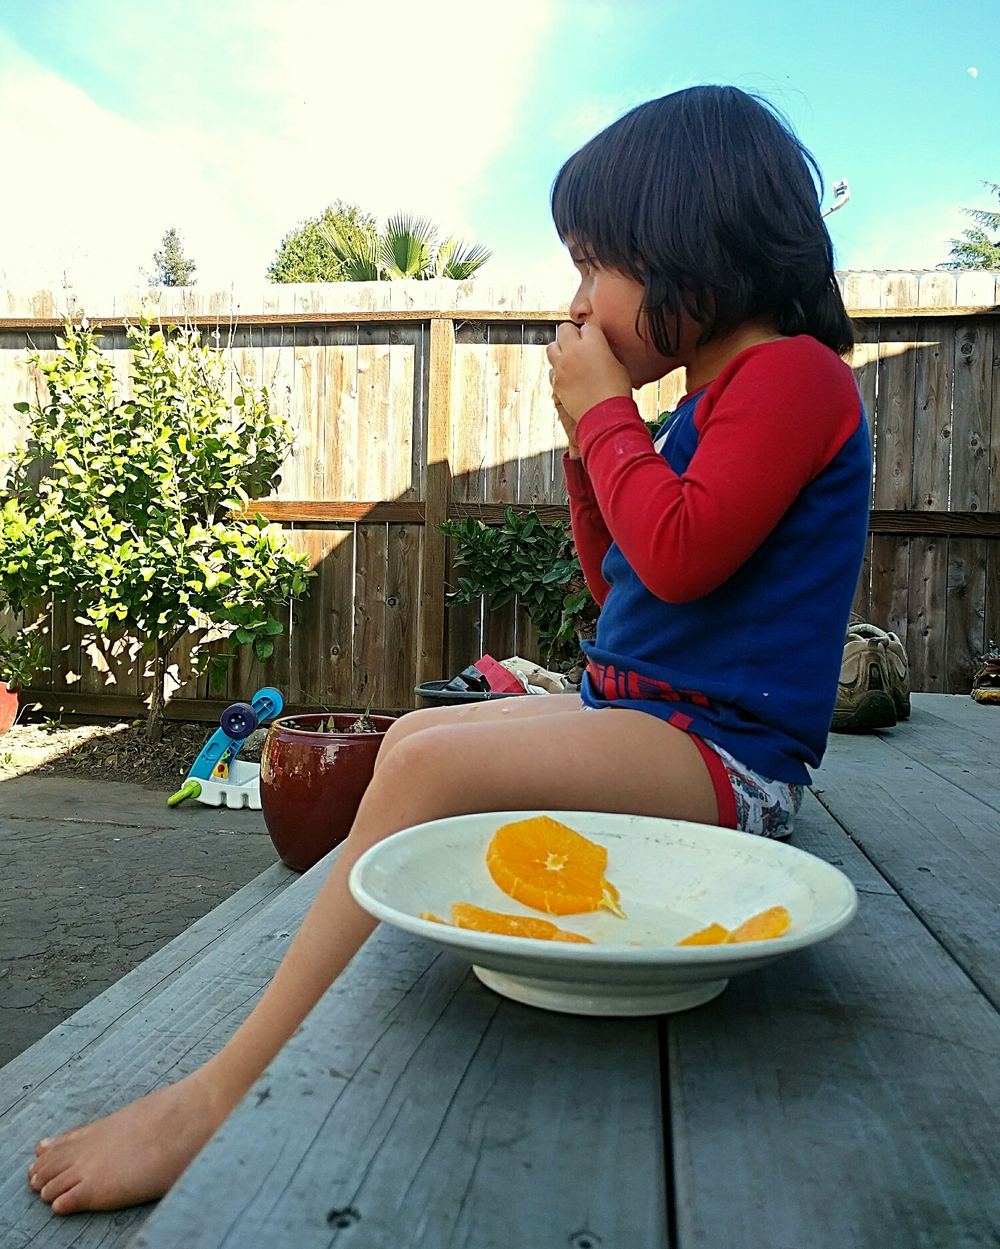 So warm Kamal decided he'd eat his orange outside. In his underpants.